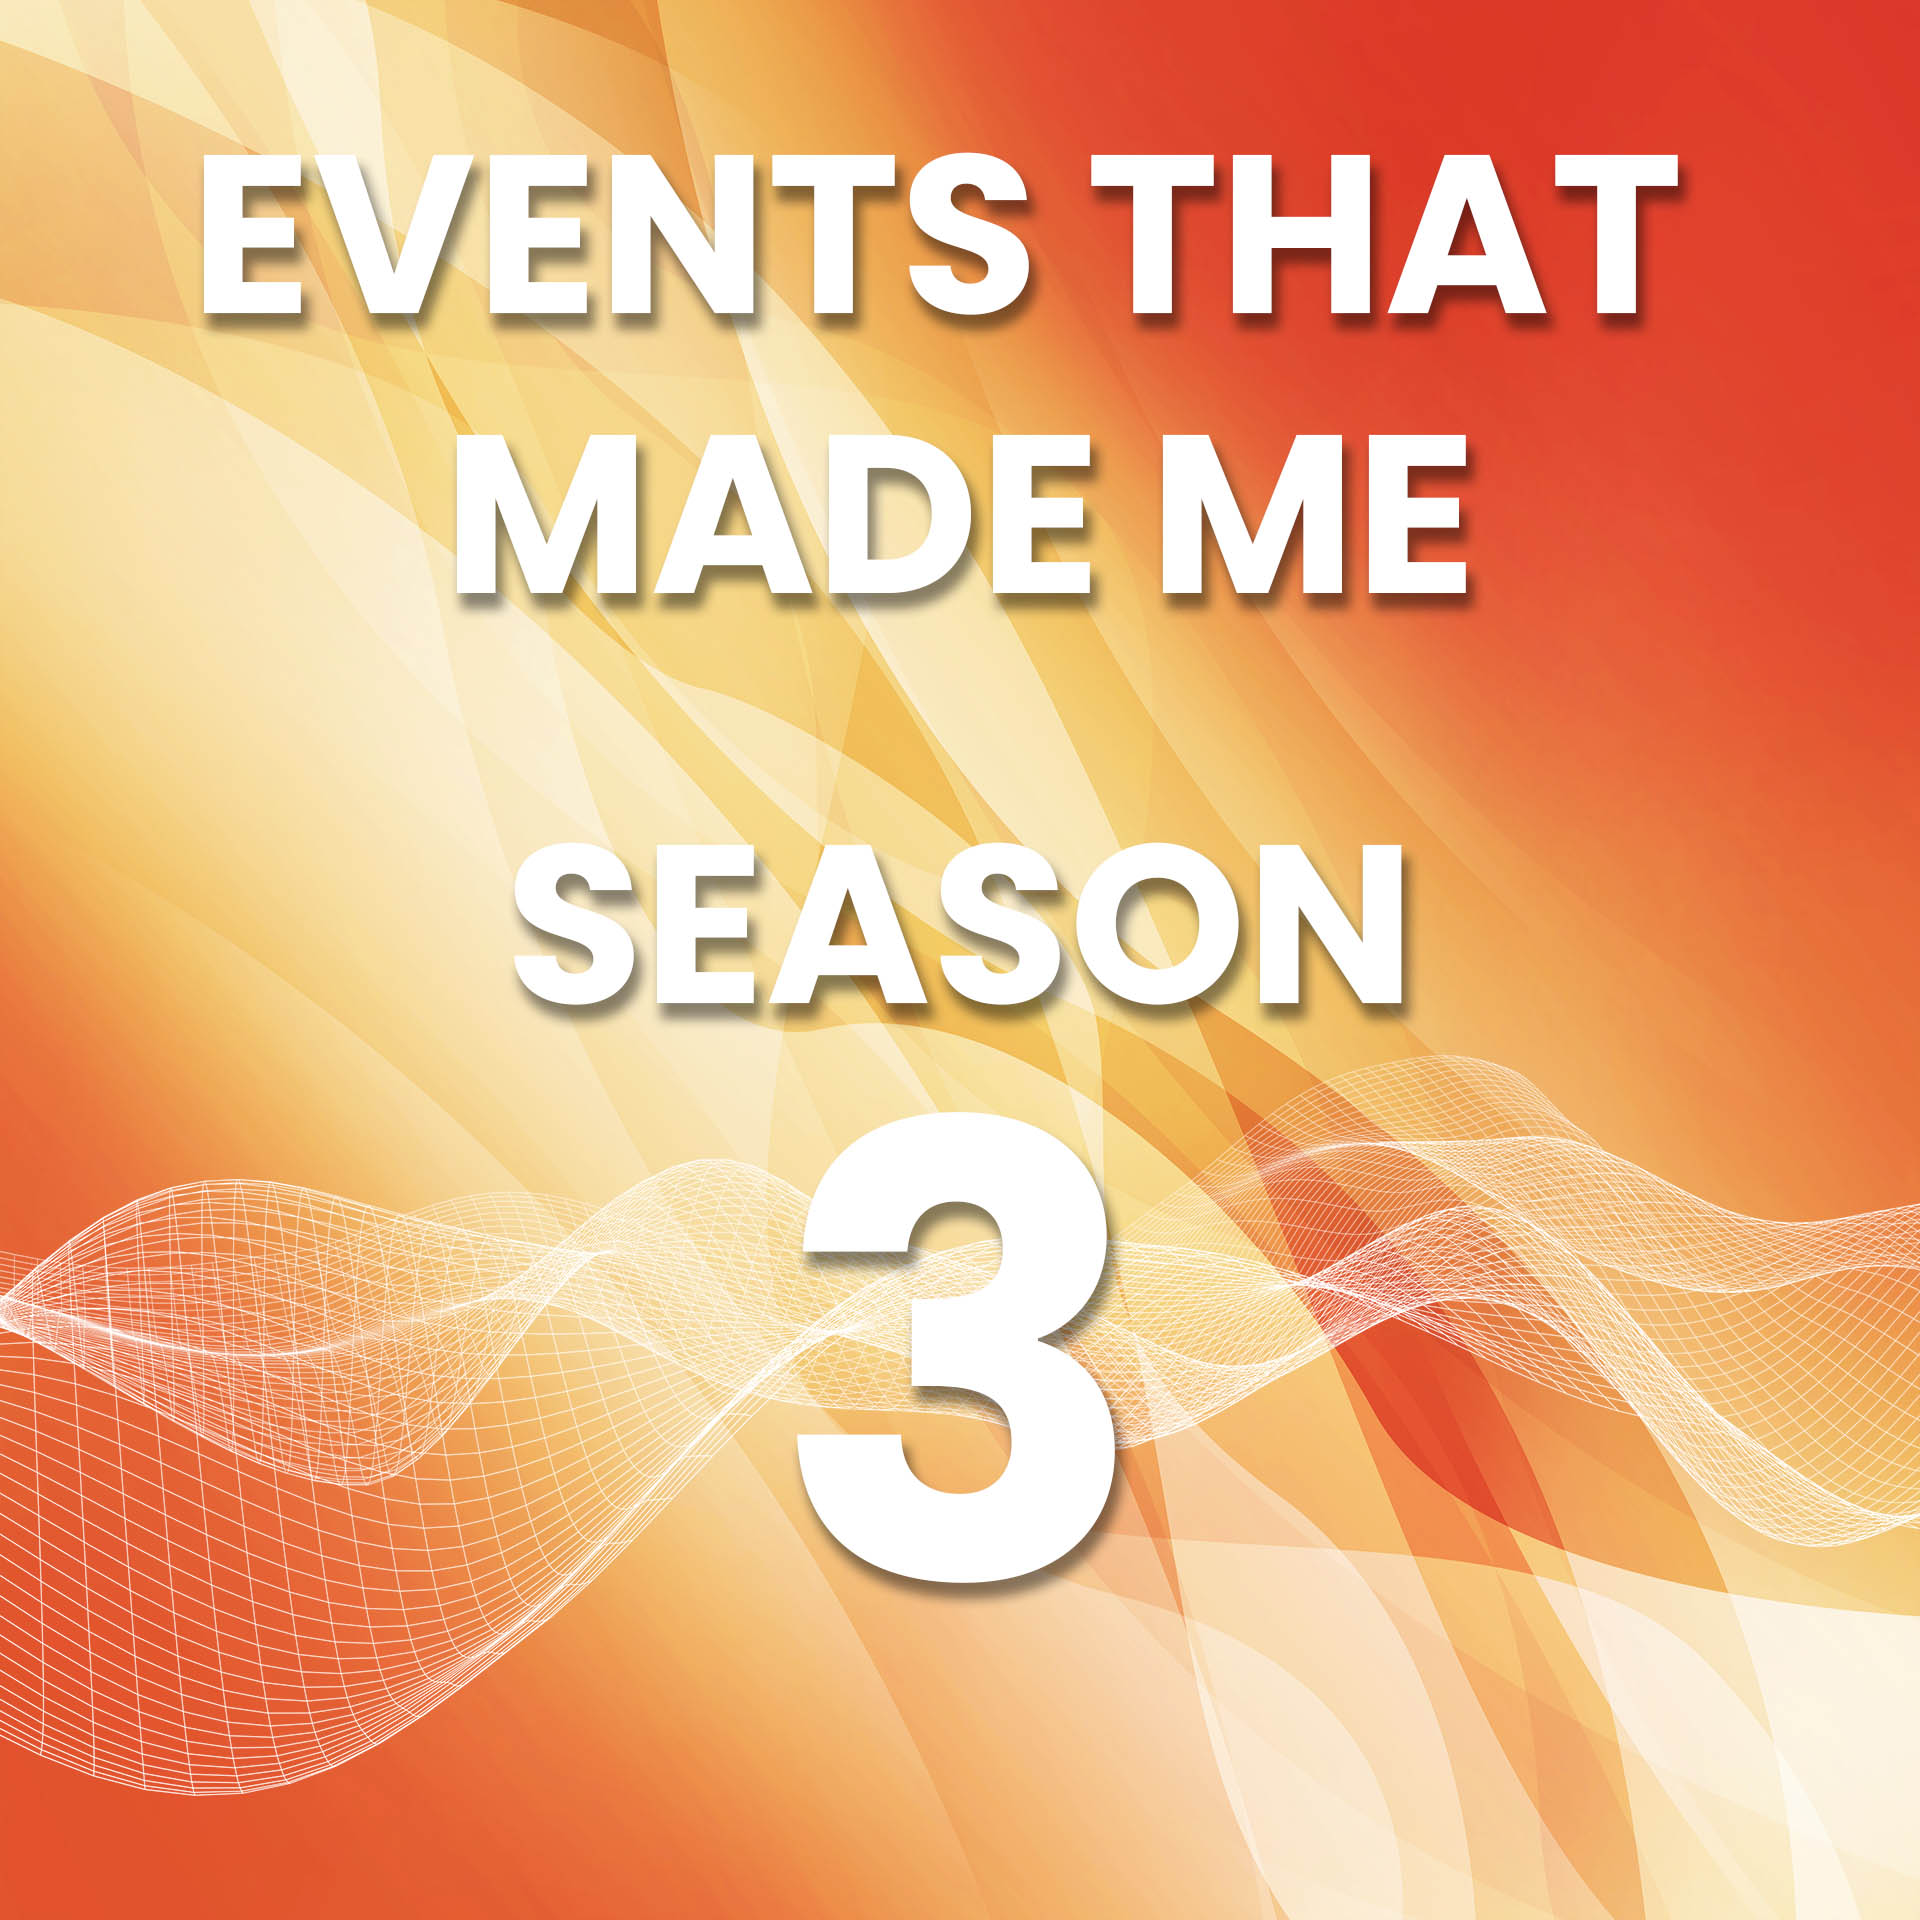 Events that Made Me Season 3